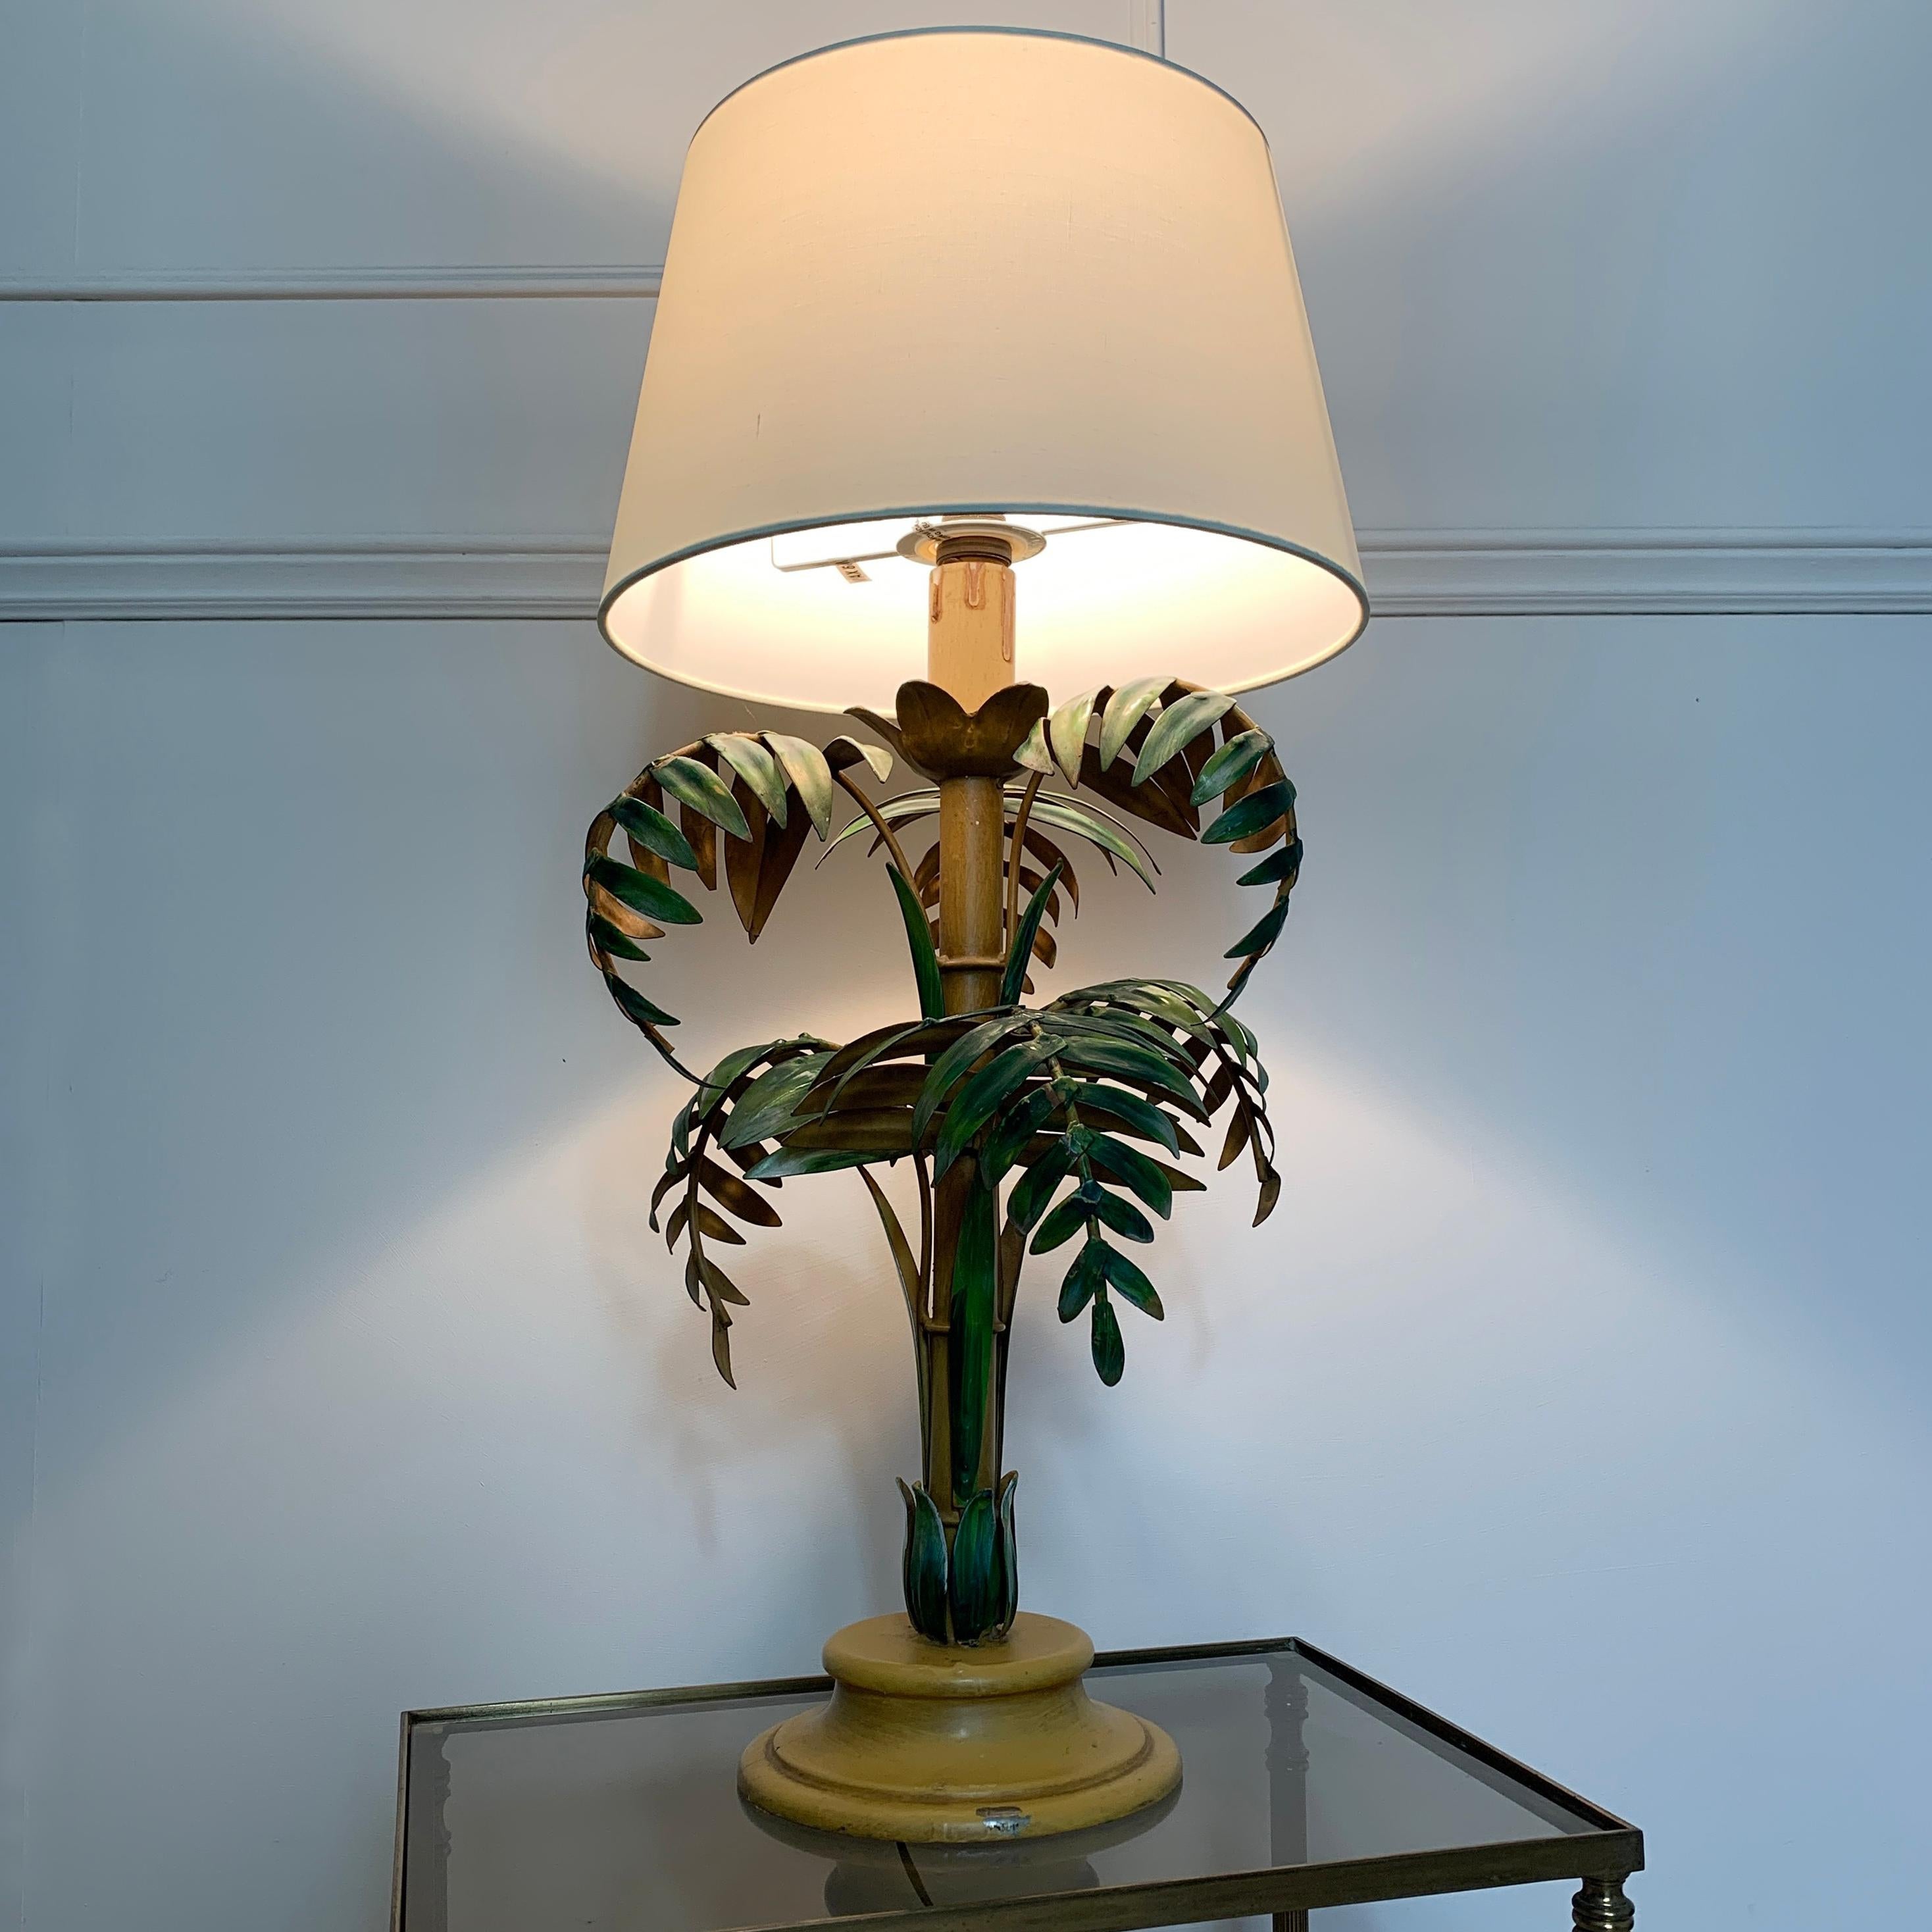 Midcentury, tole palm tree table lamp, circa 1950s.
Fantastic faux bamboo main stem with branches of palm leaves all around. There is a small faux candle and single lamp holder at the top, this takes a standard b27 (bayonet bulb).
There some small